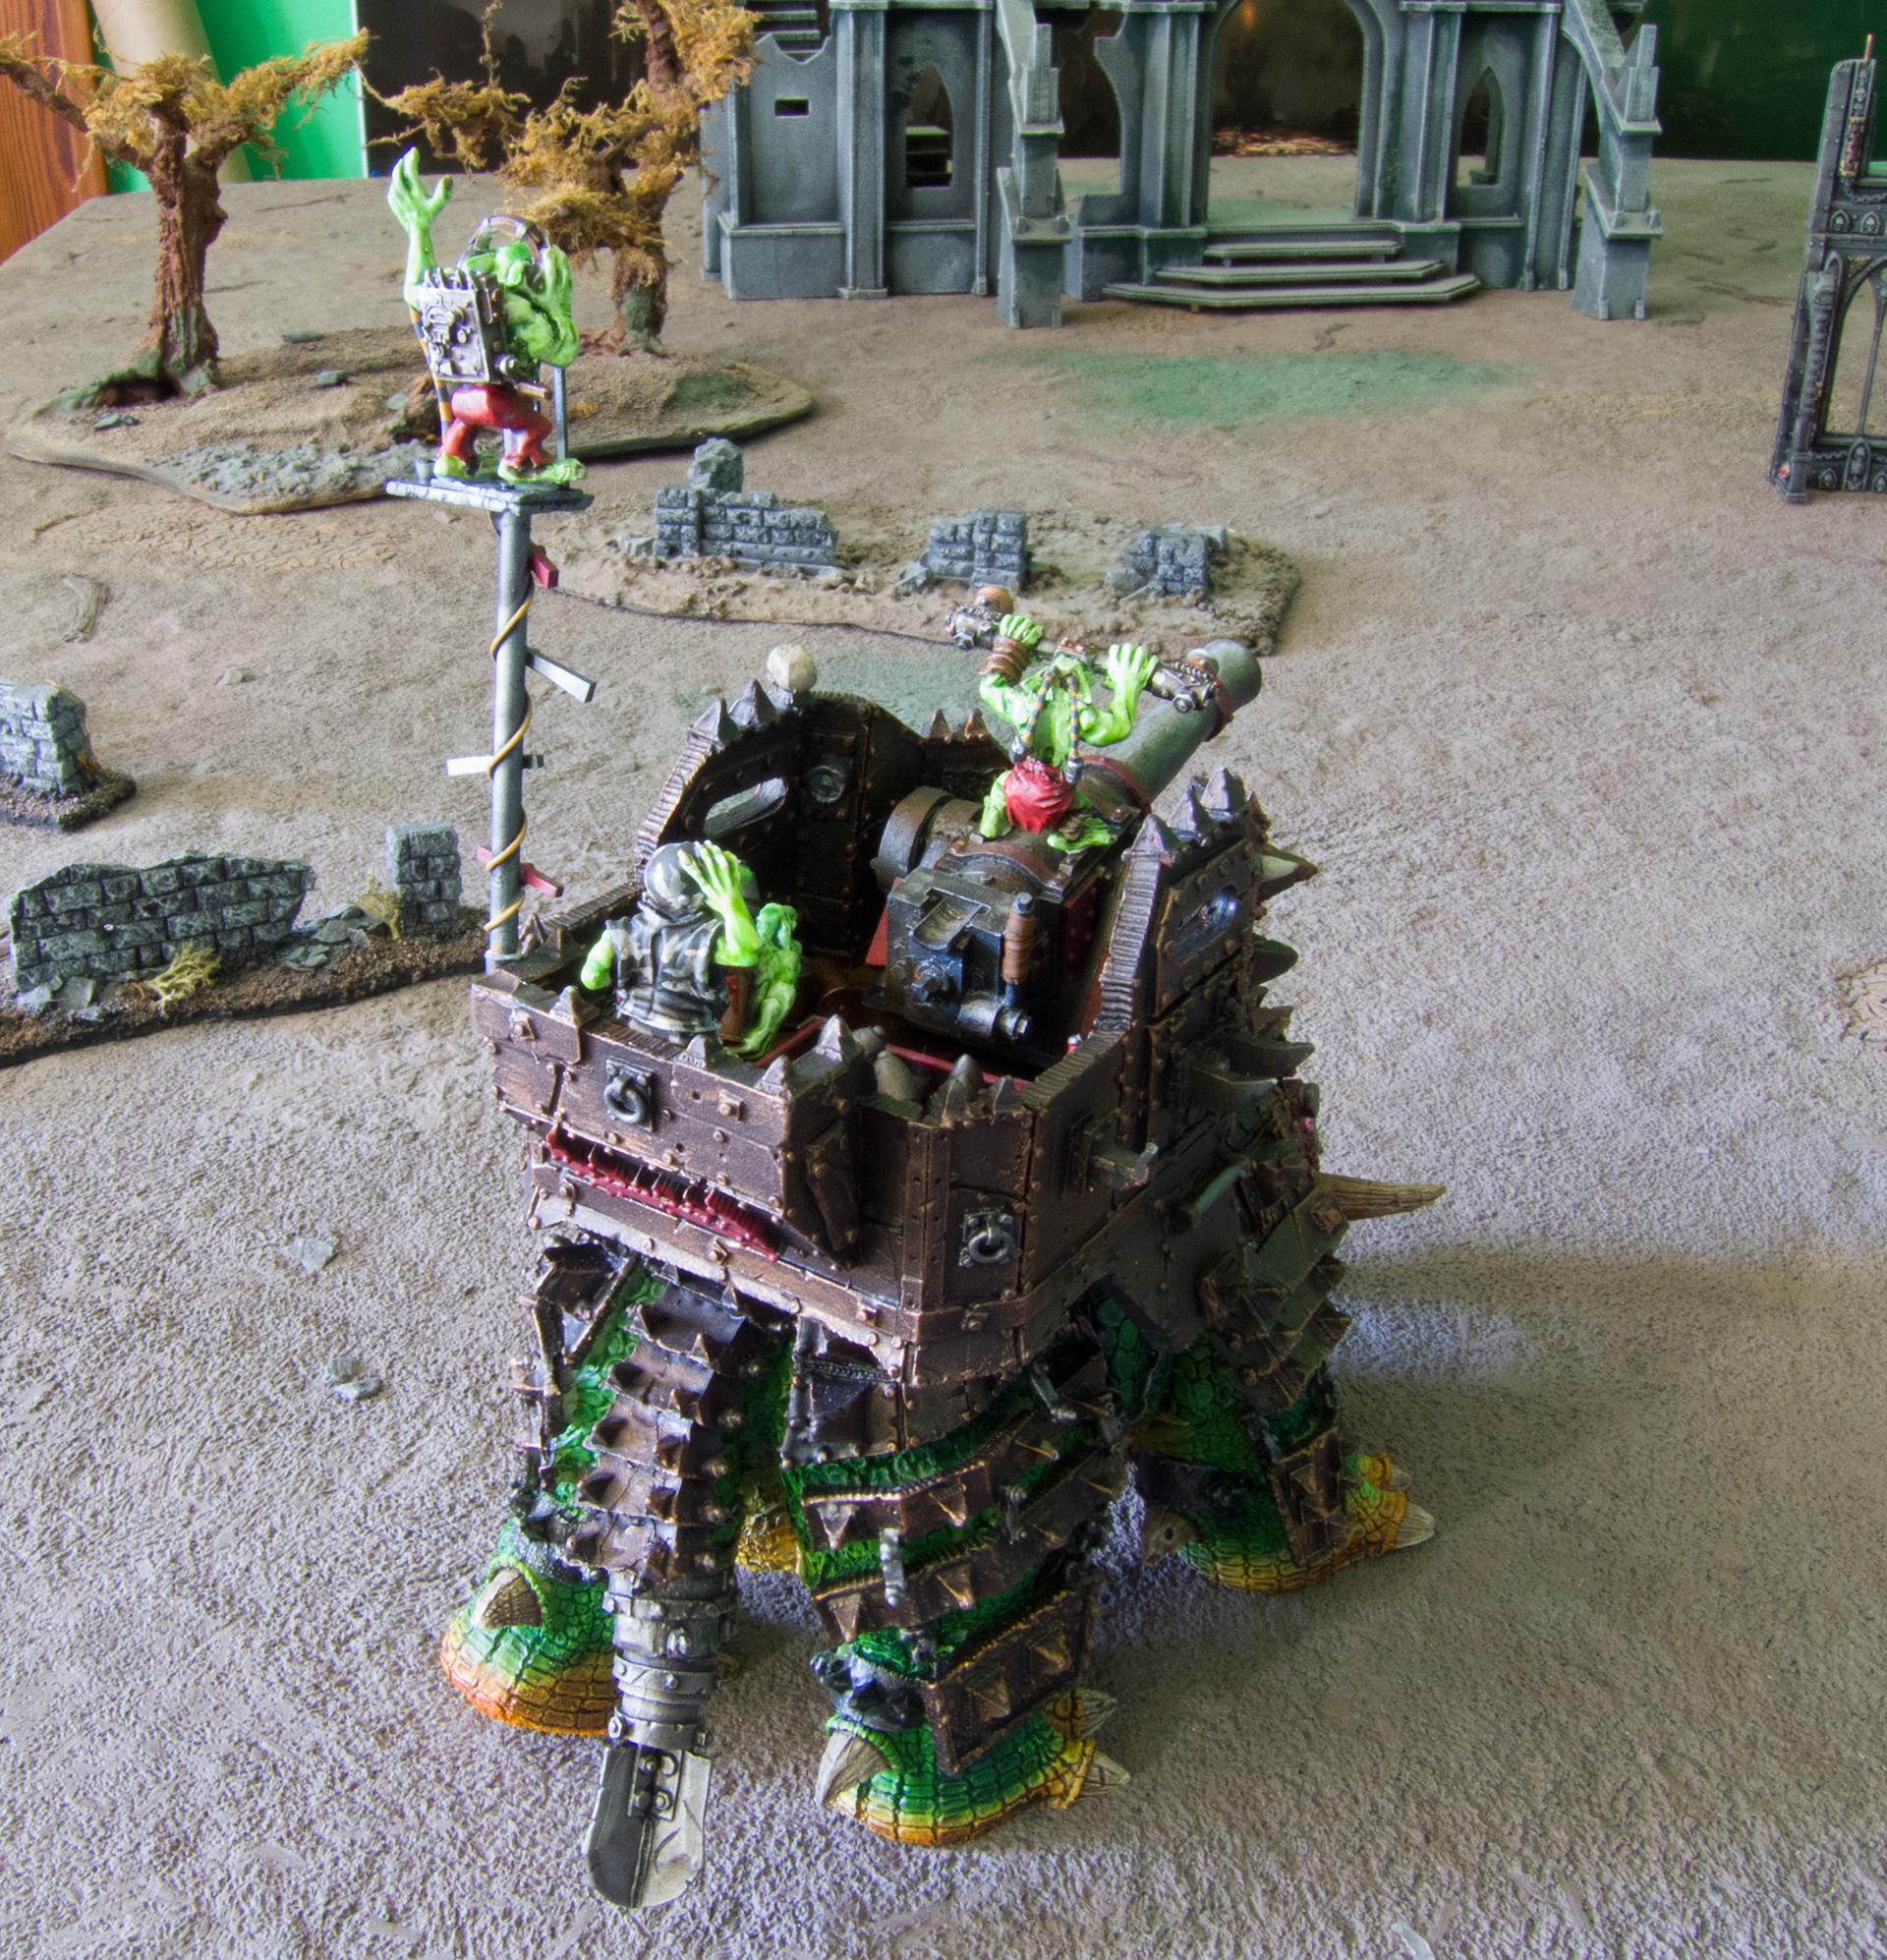 Gretchin, Grots, Orks, Ouze, Squiggoth